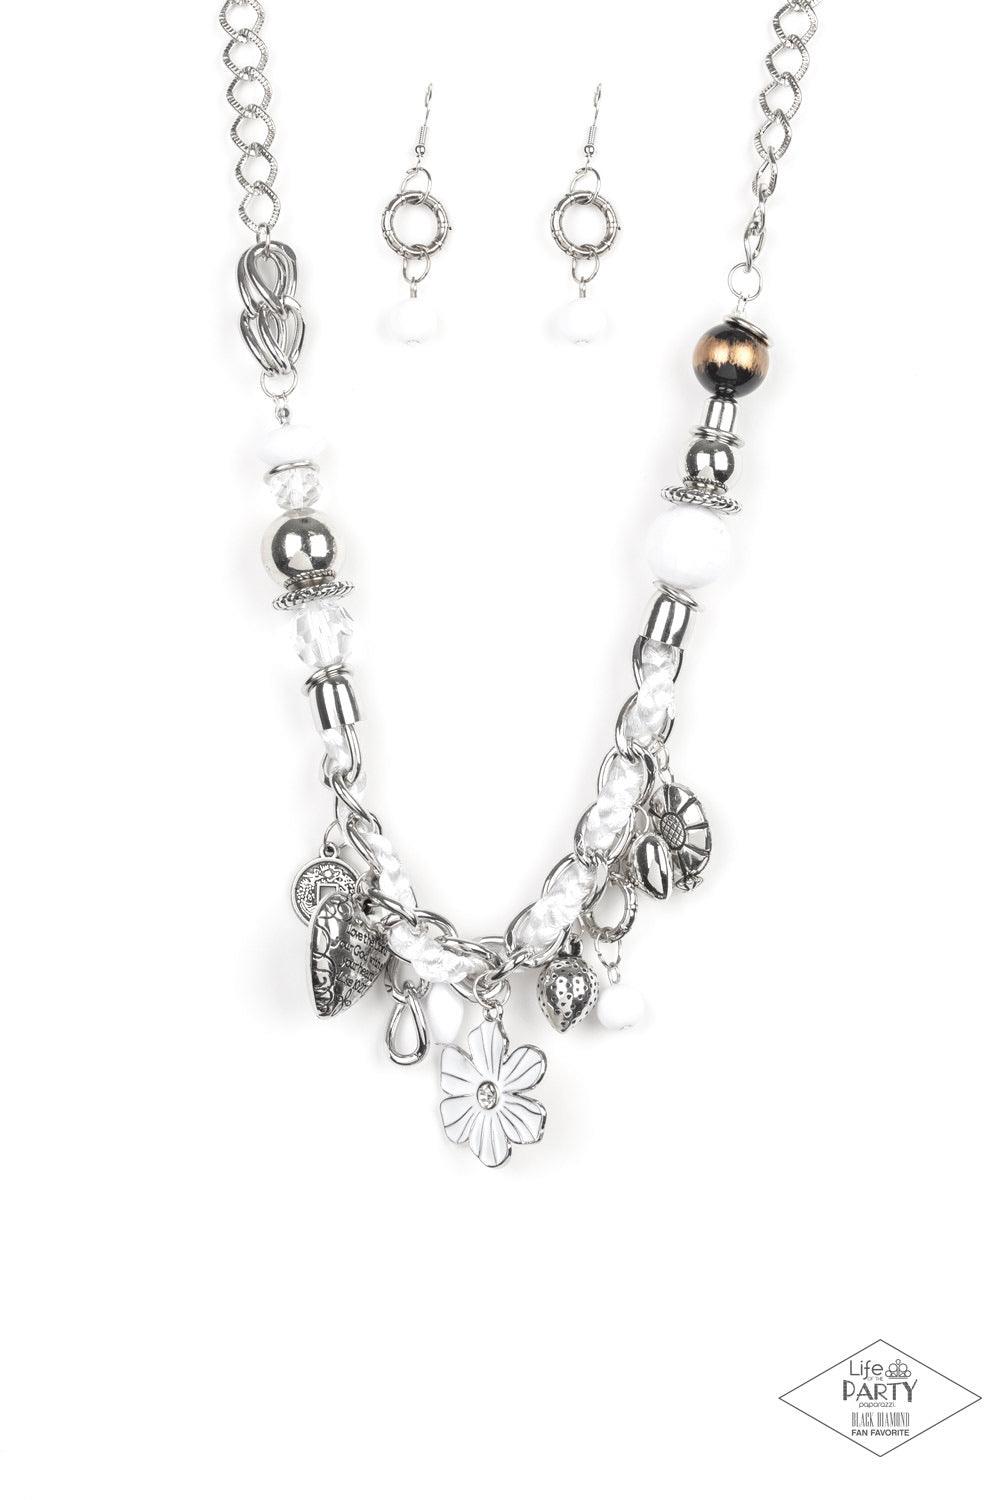 Paparazzi Accessories Charmed, I Am Sure - White White and ivory cording is braided through a chunky silver chain. A unique variety of charms decorate the piece including a delicate flower and a heart inscribed with the phrase "With All My Heart" on one s